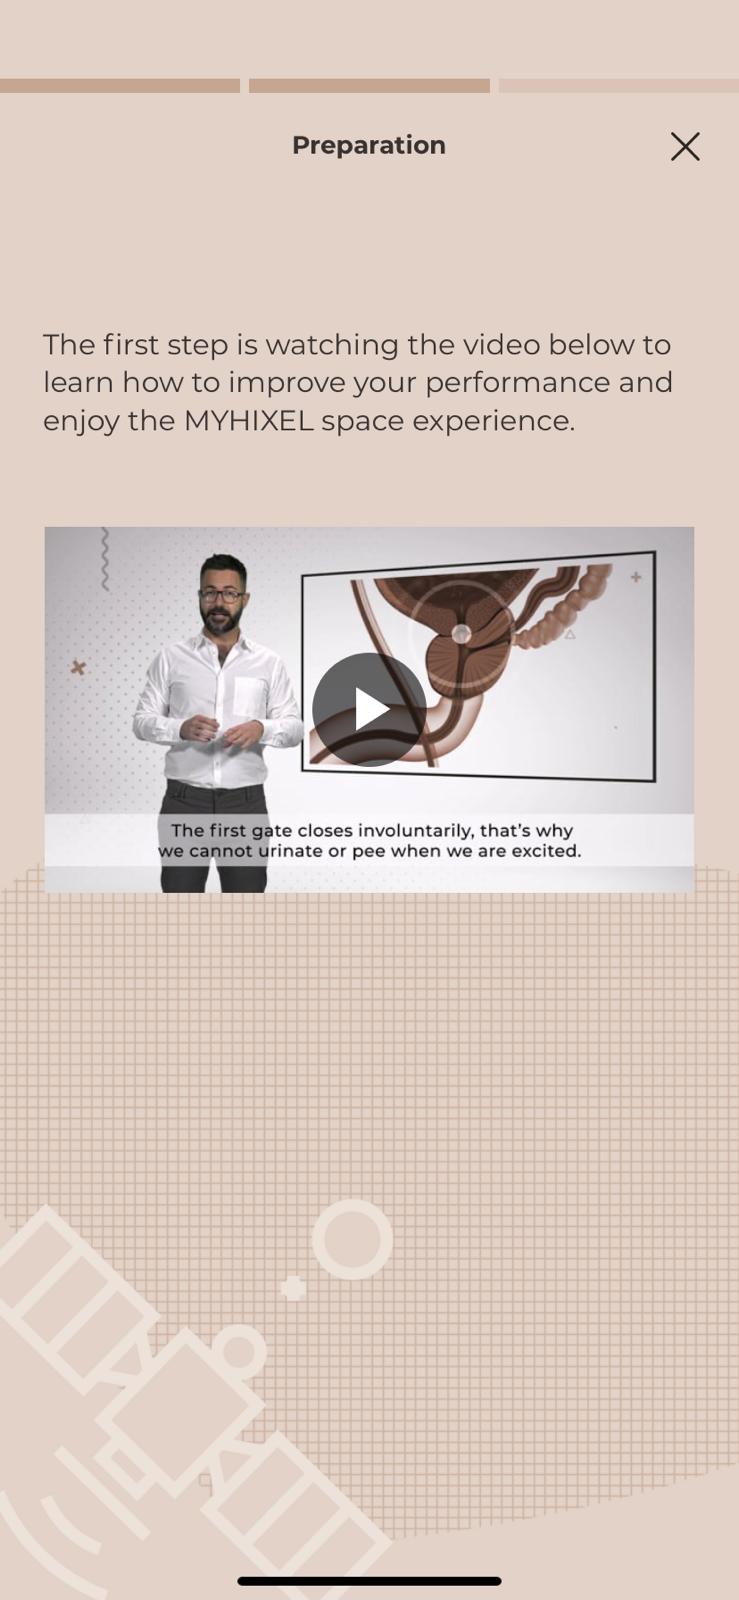 Screengrab from the MyHixel app showing a video of a man teaching about the physiology of ejaculation